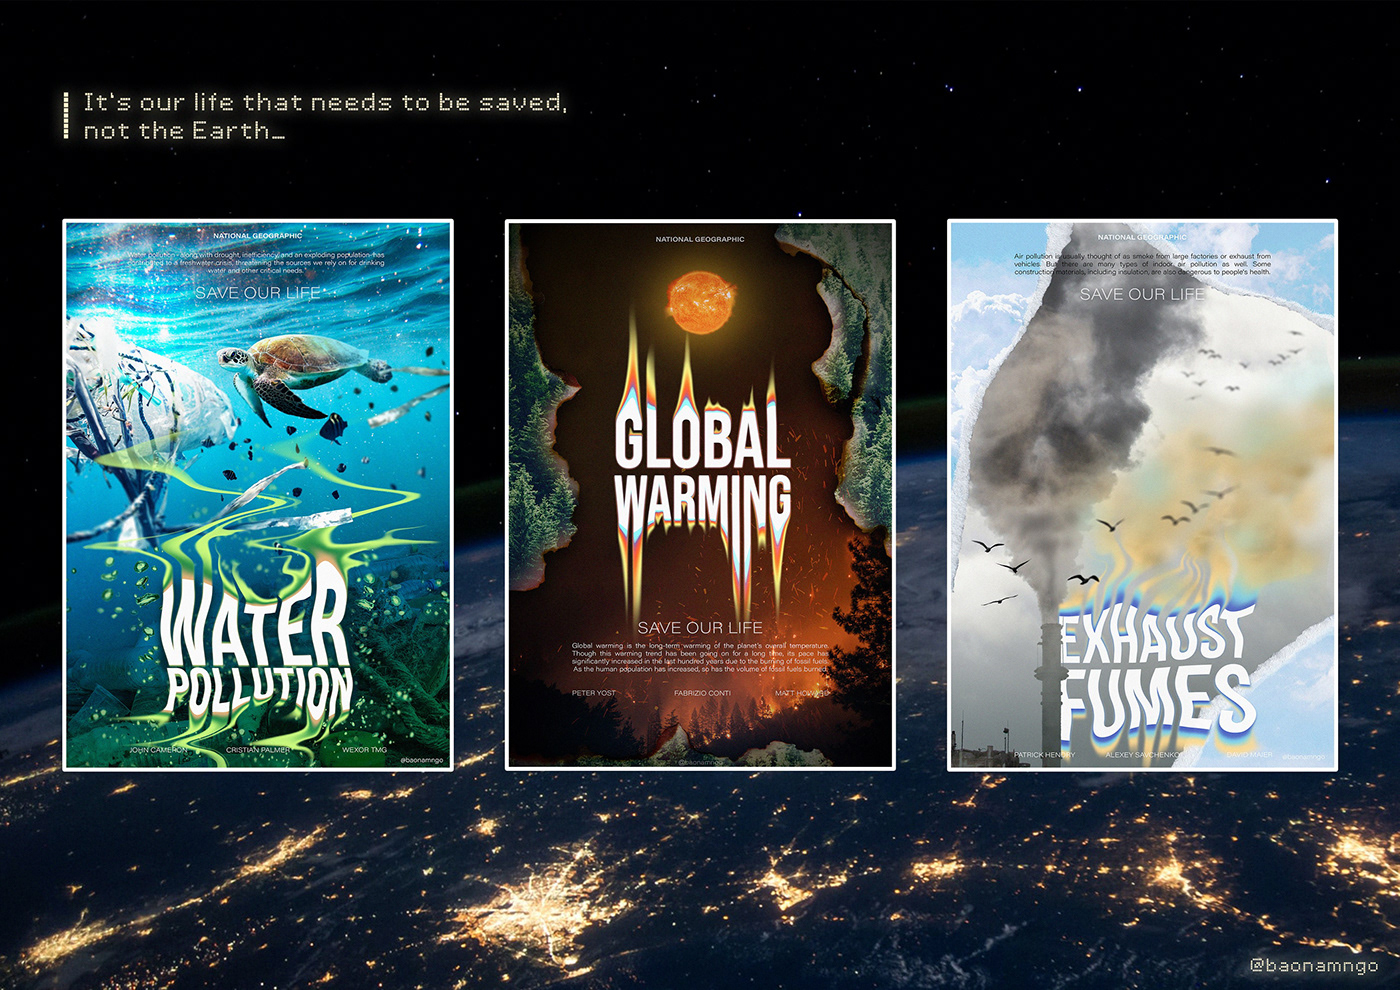 A poster project about environmental issues: Global Warming, Water Pollution and Exhaust Fumes